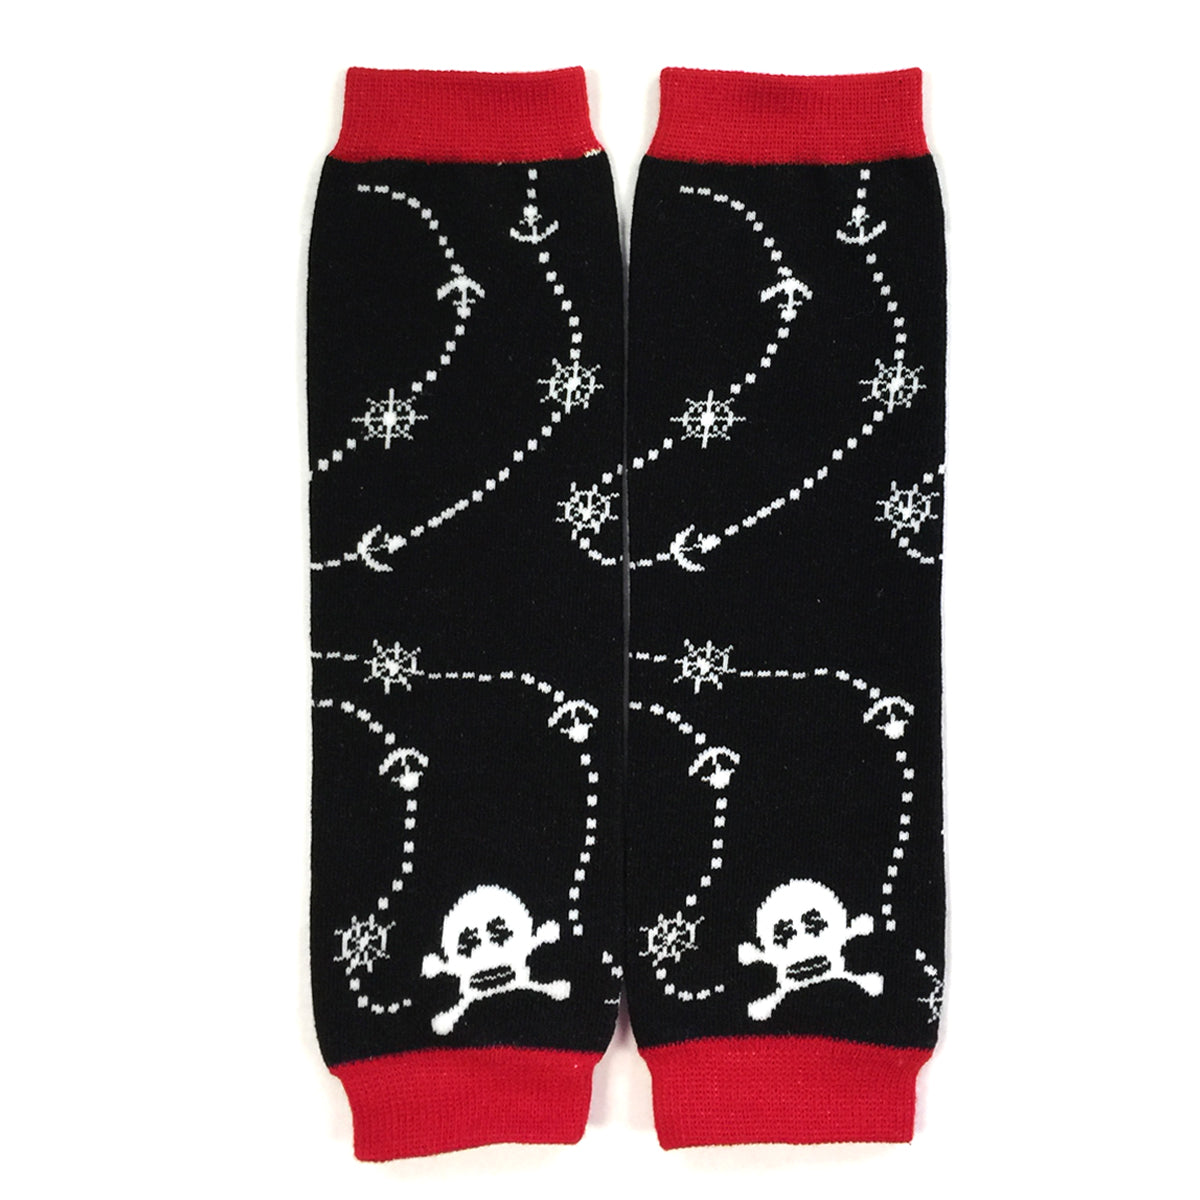 Wrapables Pirates Baby Leg Warmers